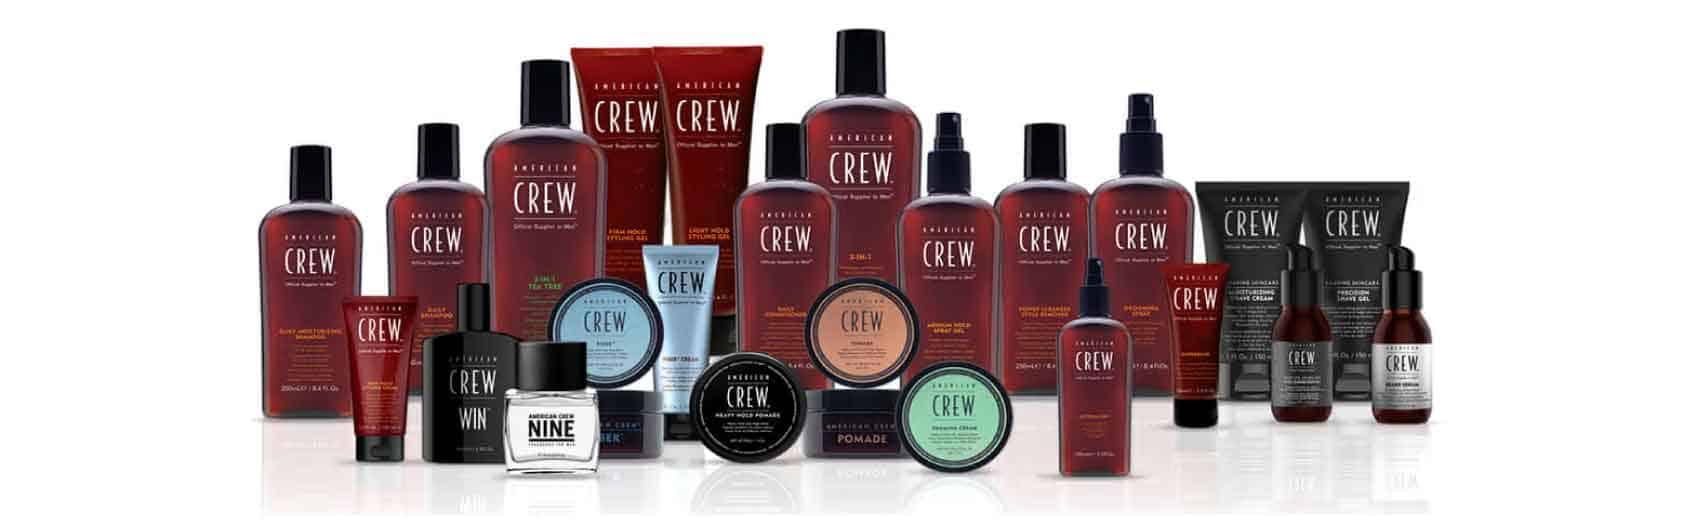 American Crew Products | Lords Grooming